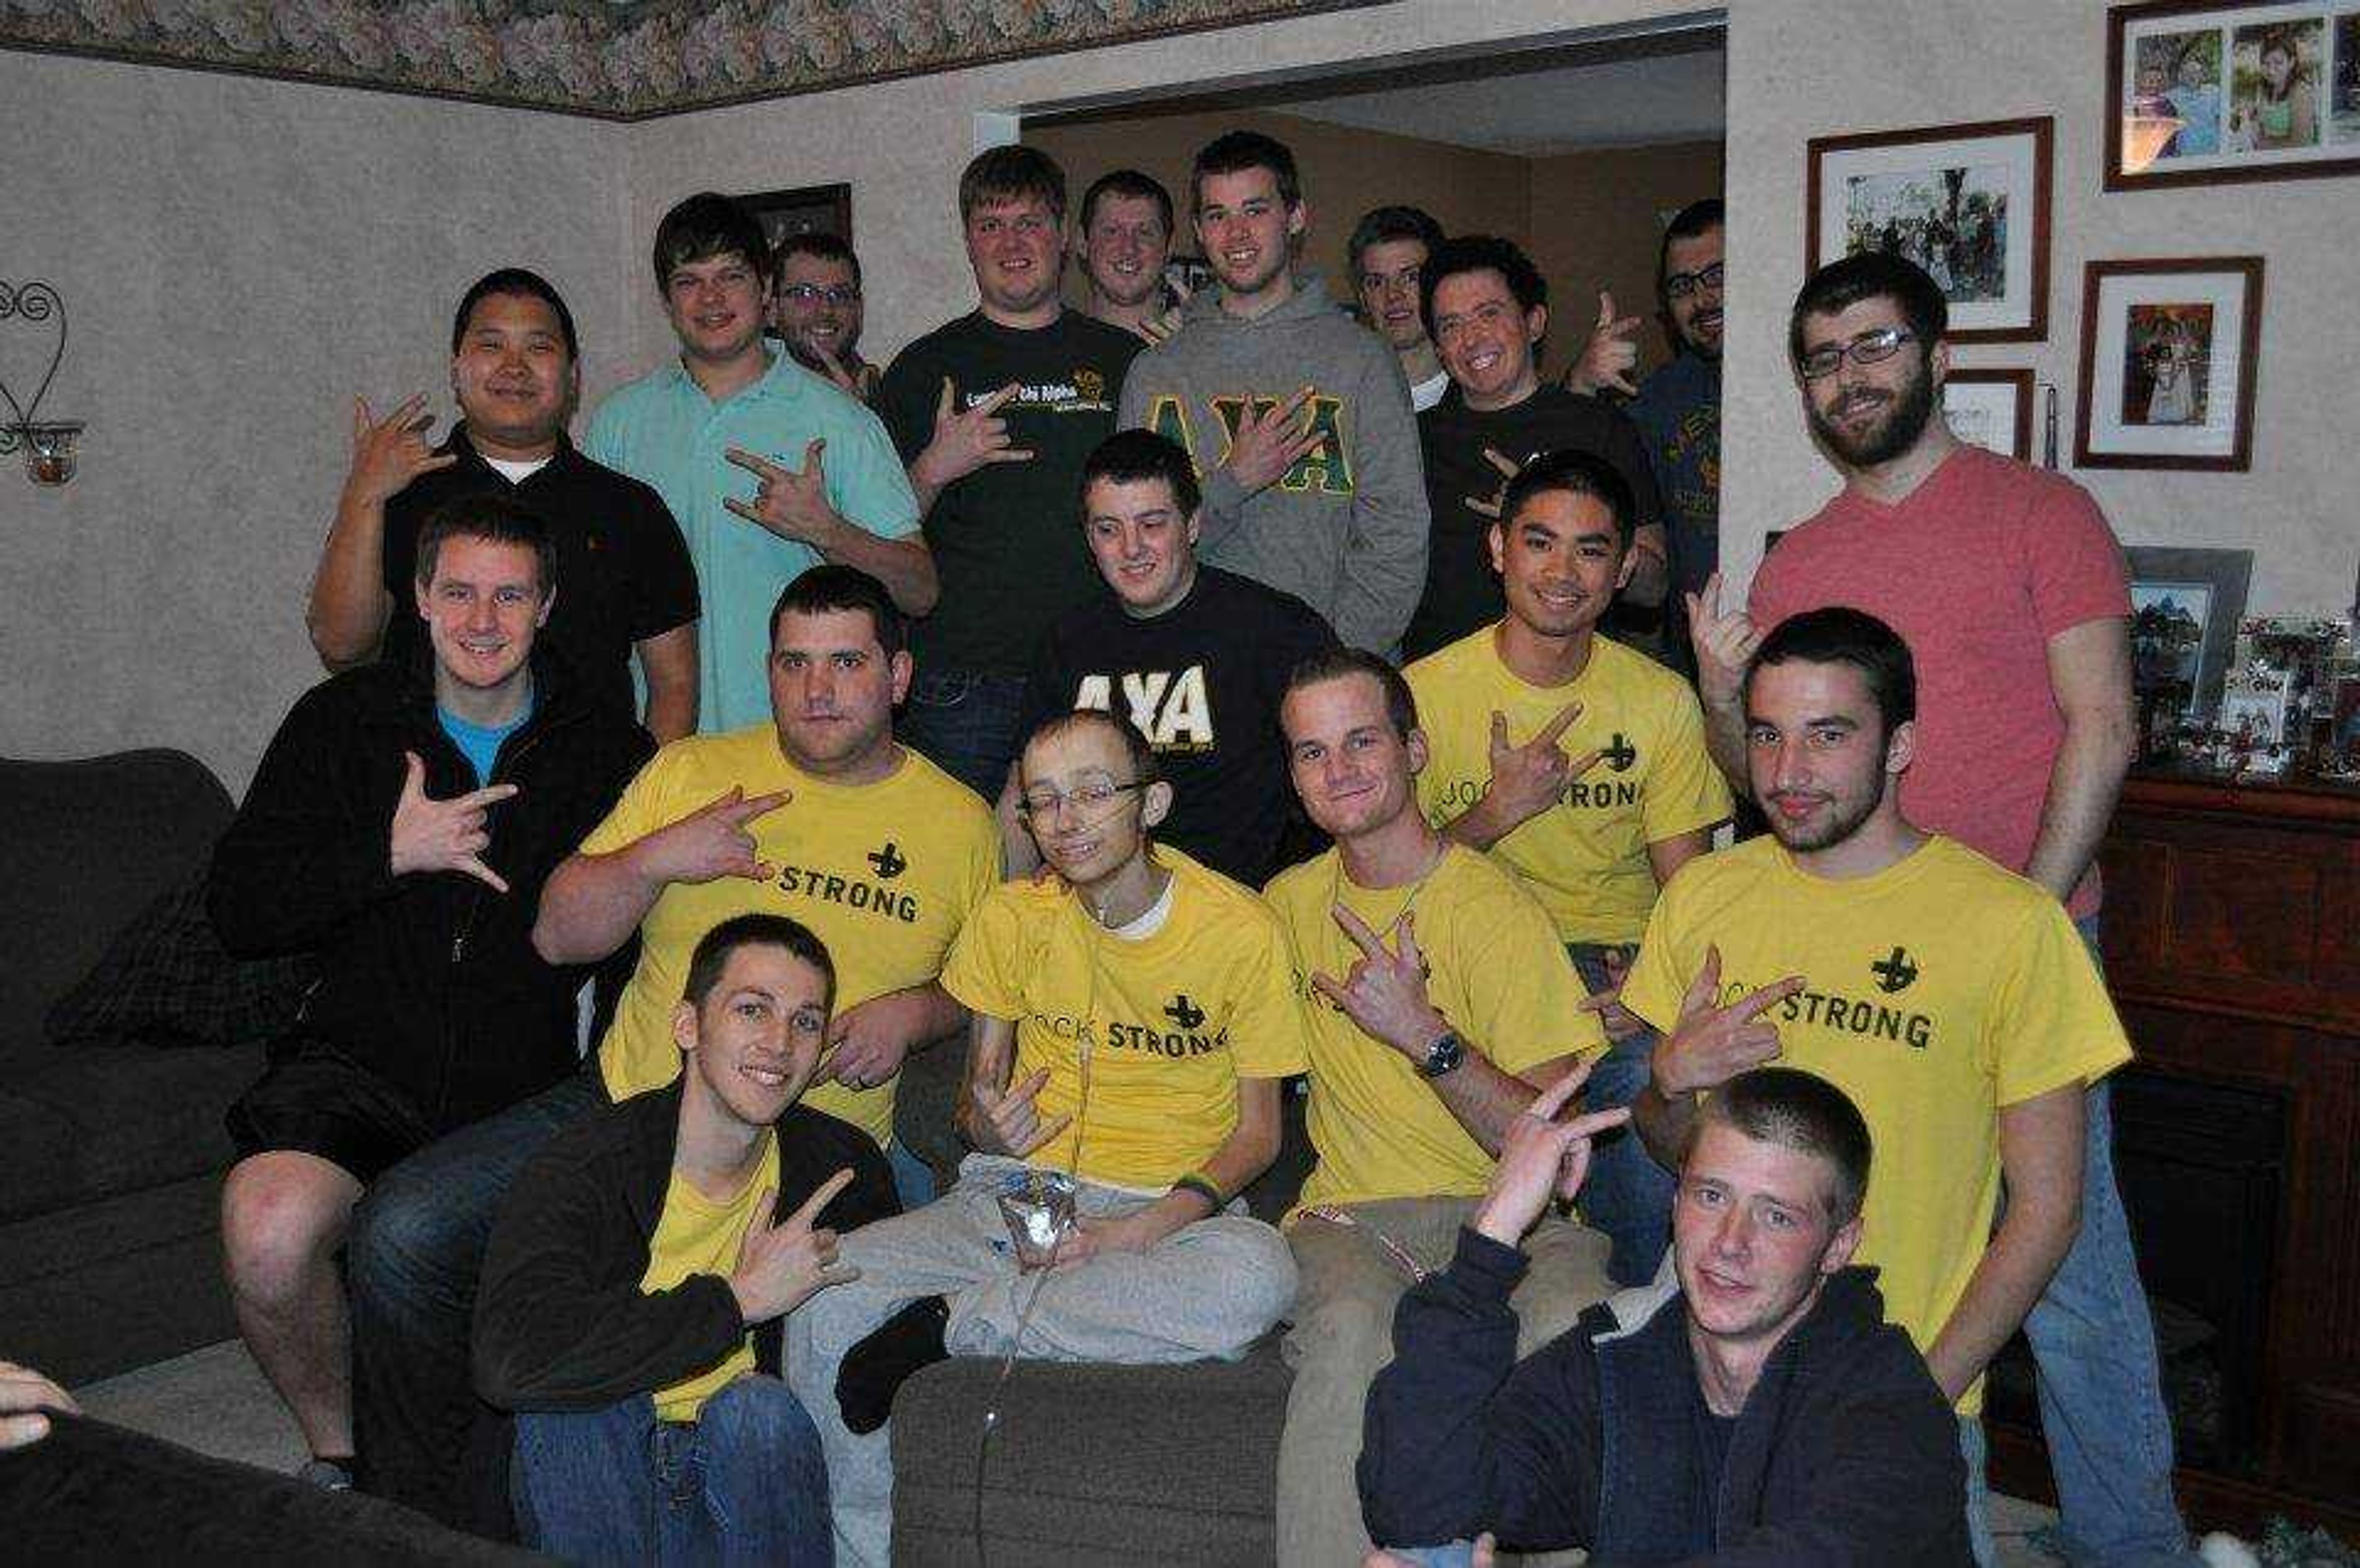 Lambda Chi Alpha Chapter honors brother's memory